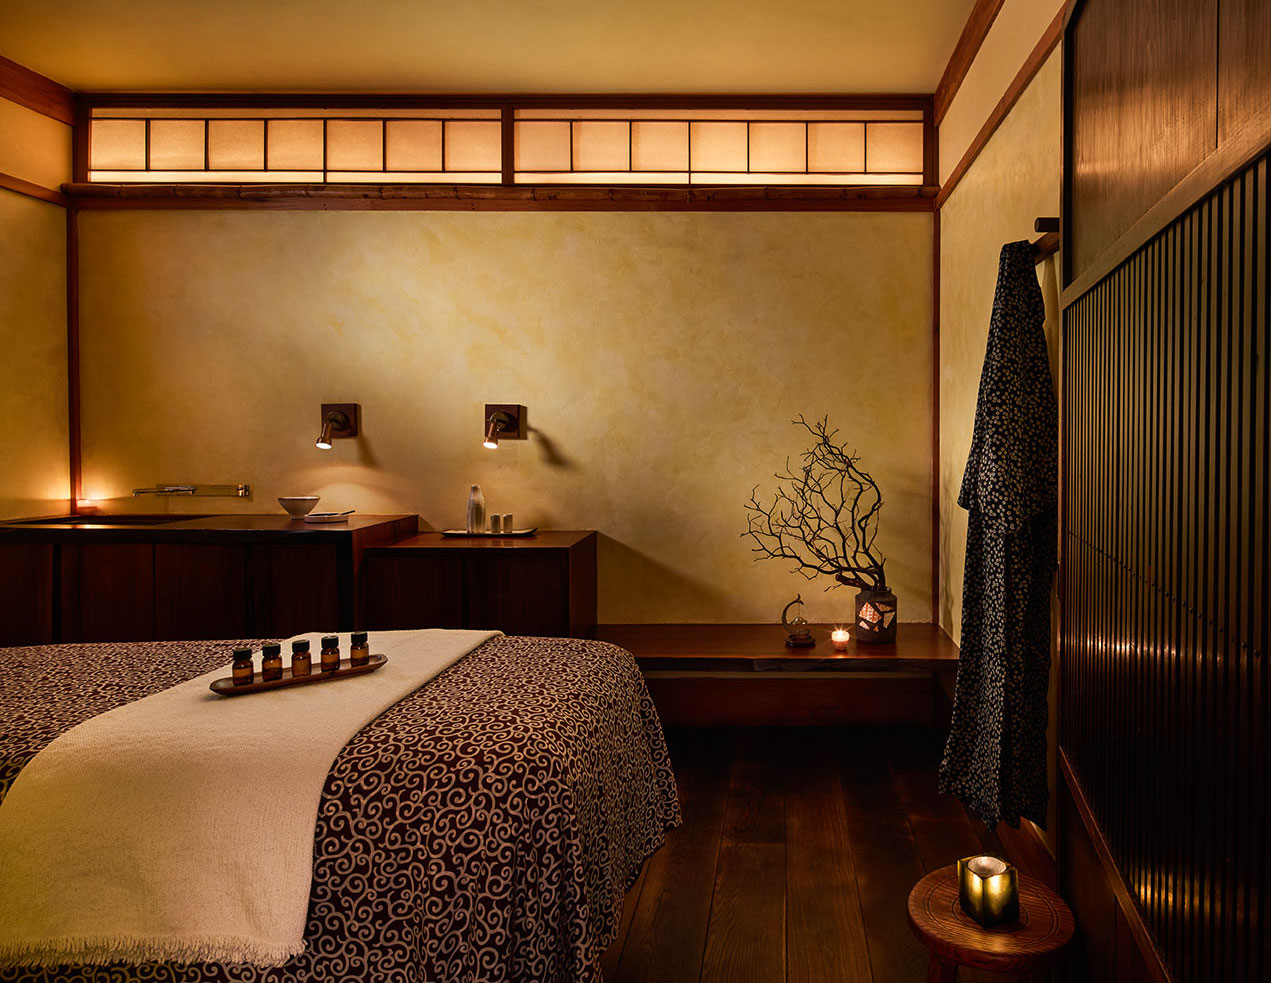 A Shibui Spa treatment room. View of the treatment table/bed, and the earthy decor